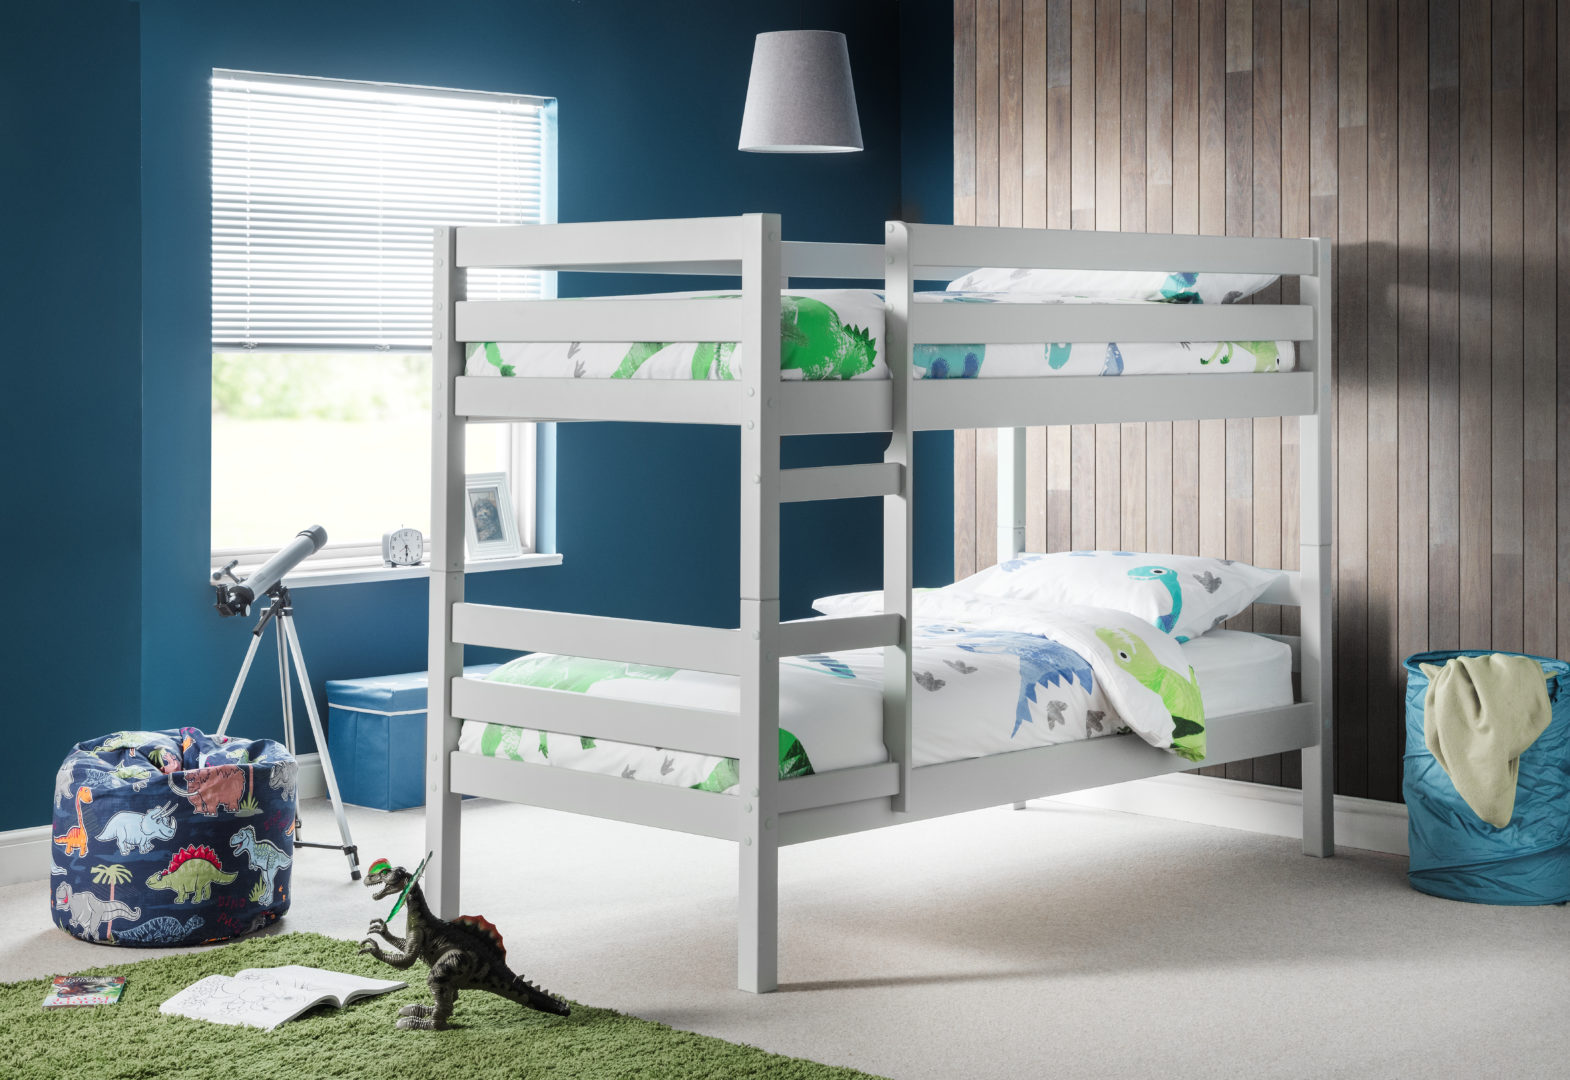 bunk beds with free mattresses included